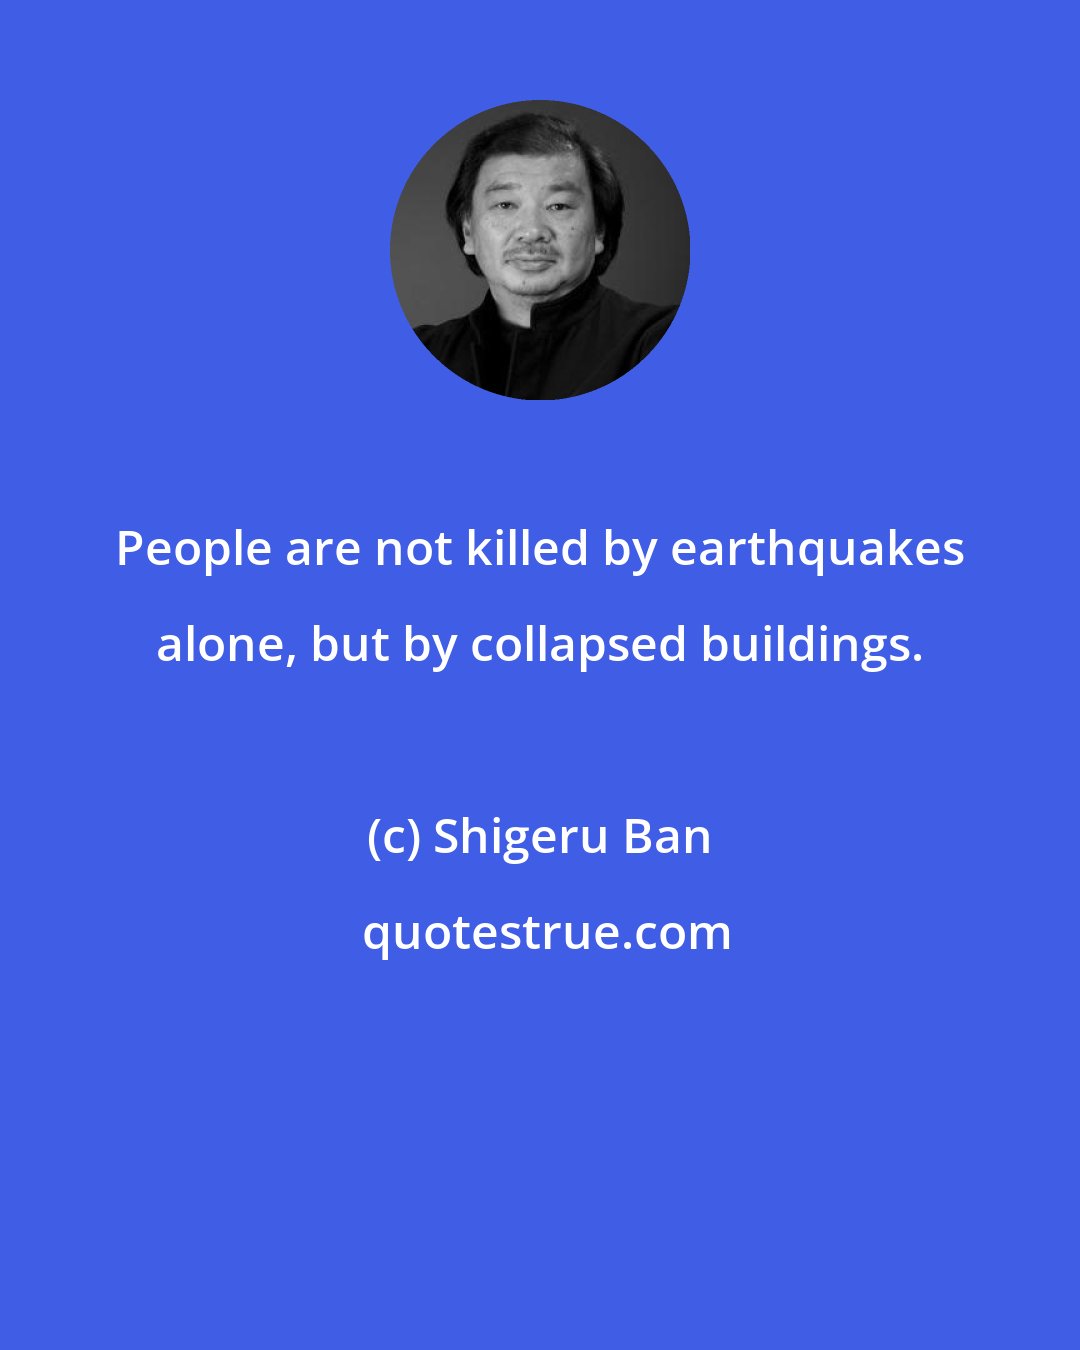 Shigeru Ban: People are not killed by earthquakes alone, but by collapsed buildings.